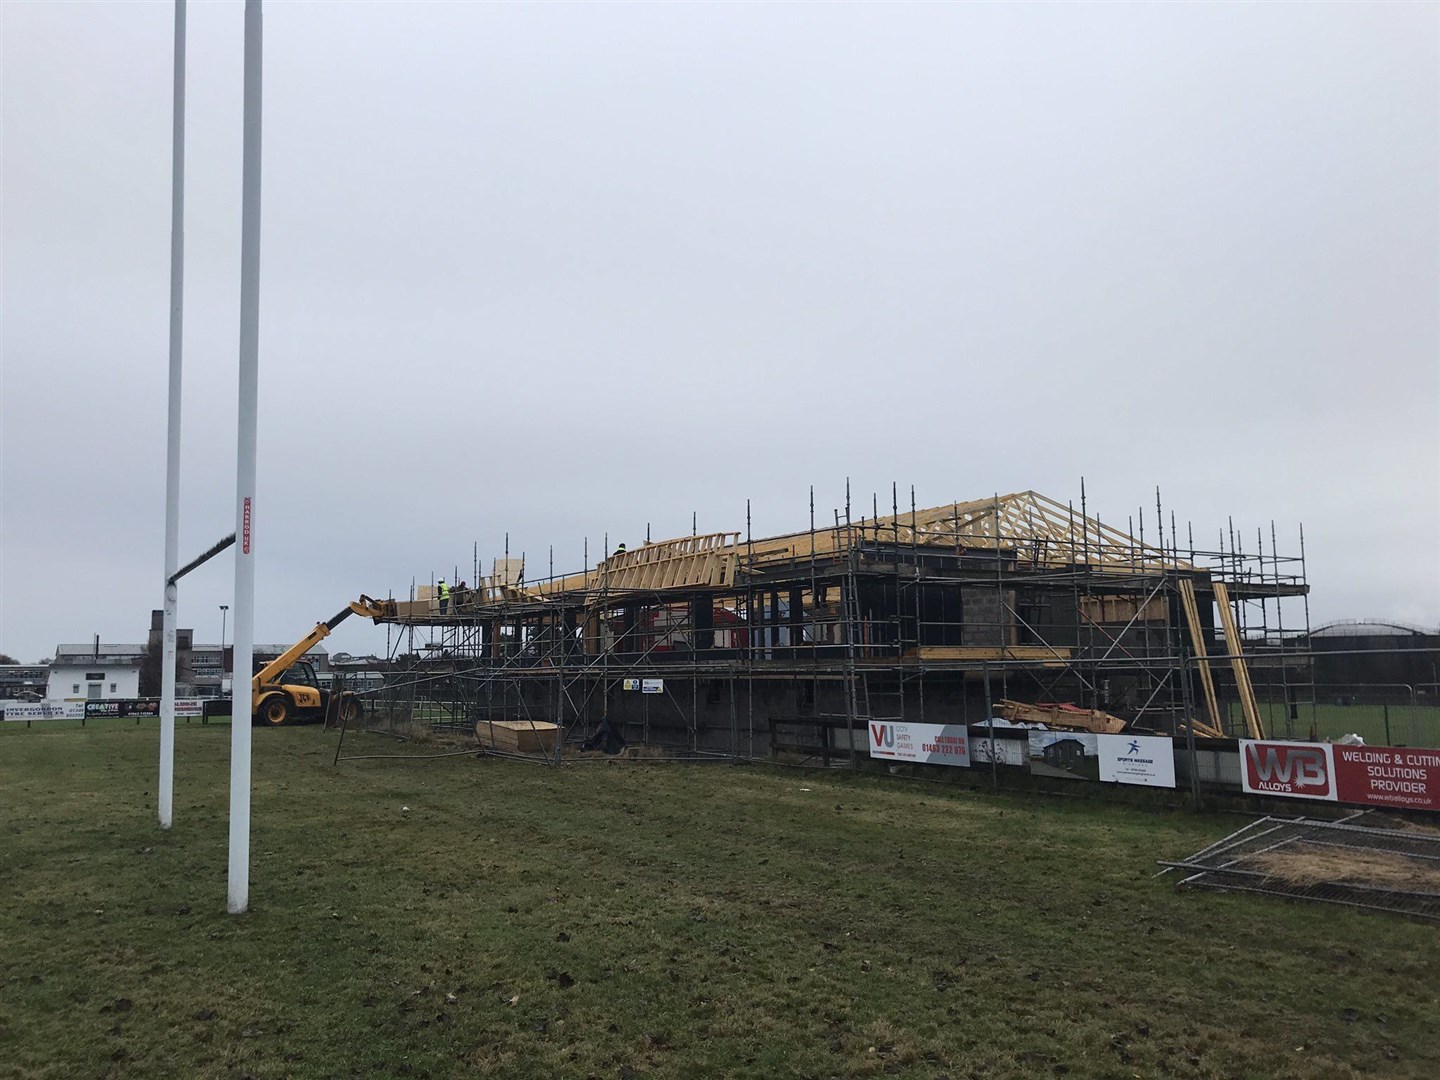 The rugby season may have been cancelled, but work on Ross Sutherland's new clubhouse continues.